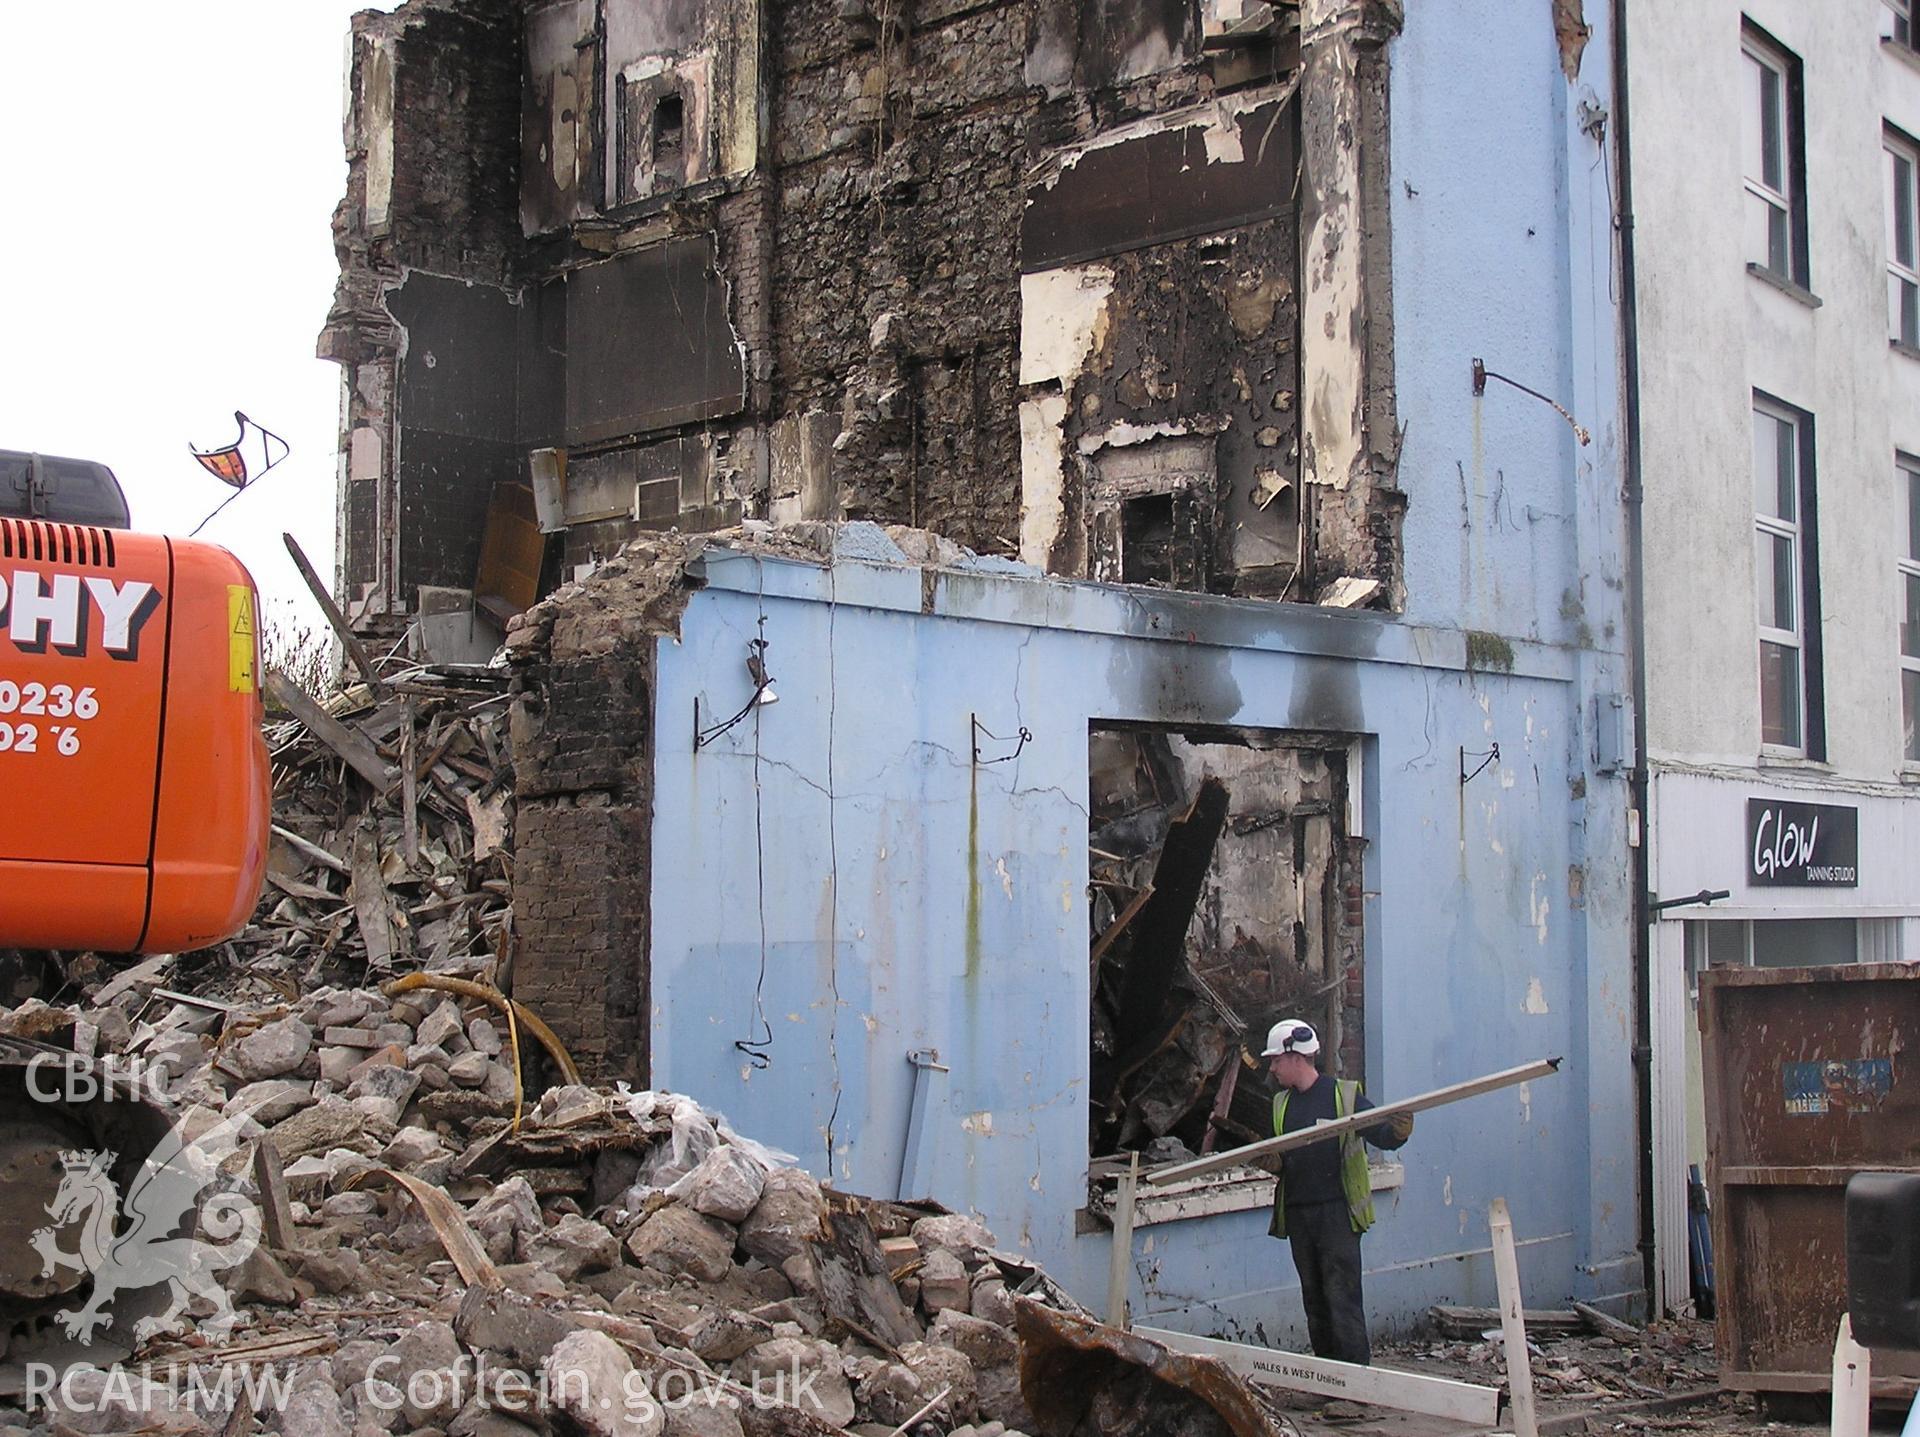 Colour digital photograph showing the Royal Gatehouse Hotel being demolished.